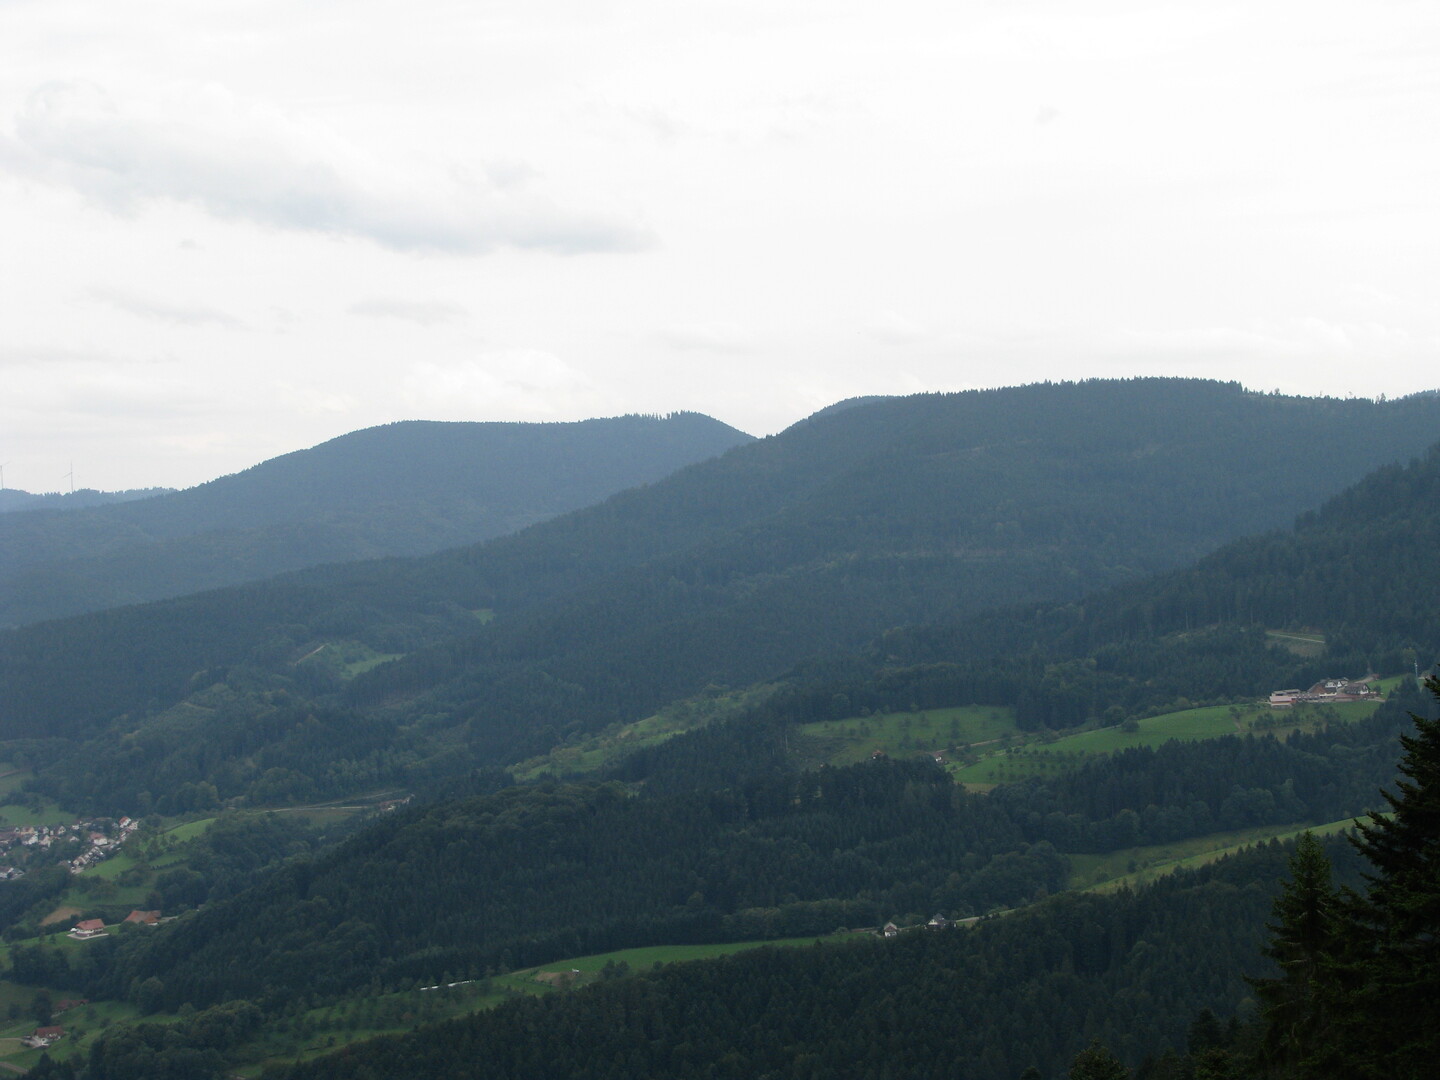 Renchtal